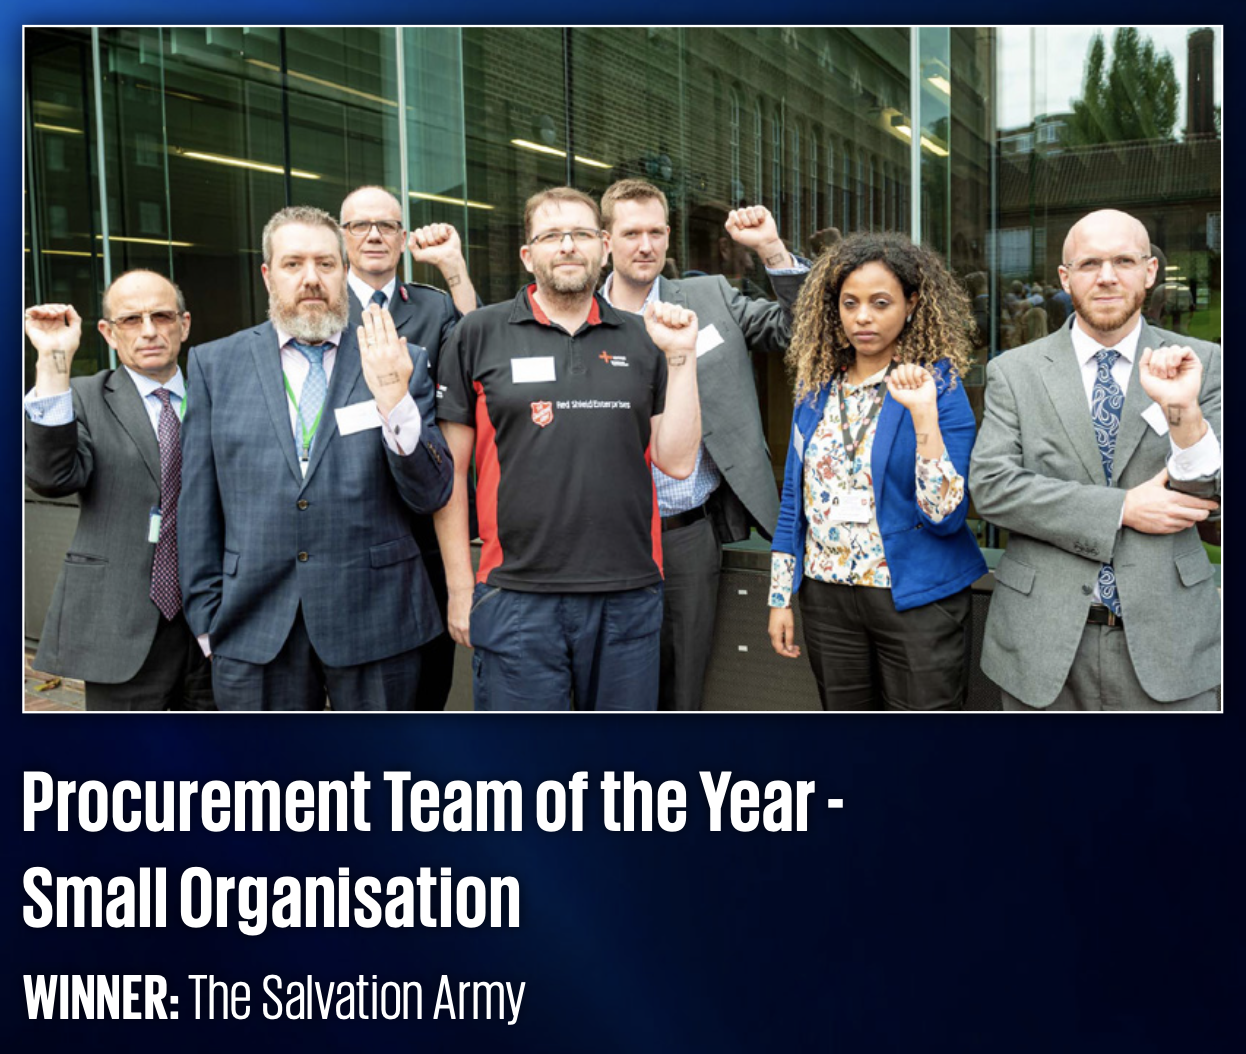 Procurement Team of the Year - Small Organisation: The Salvation Army 